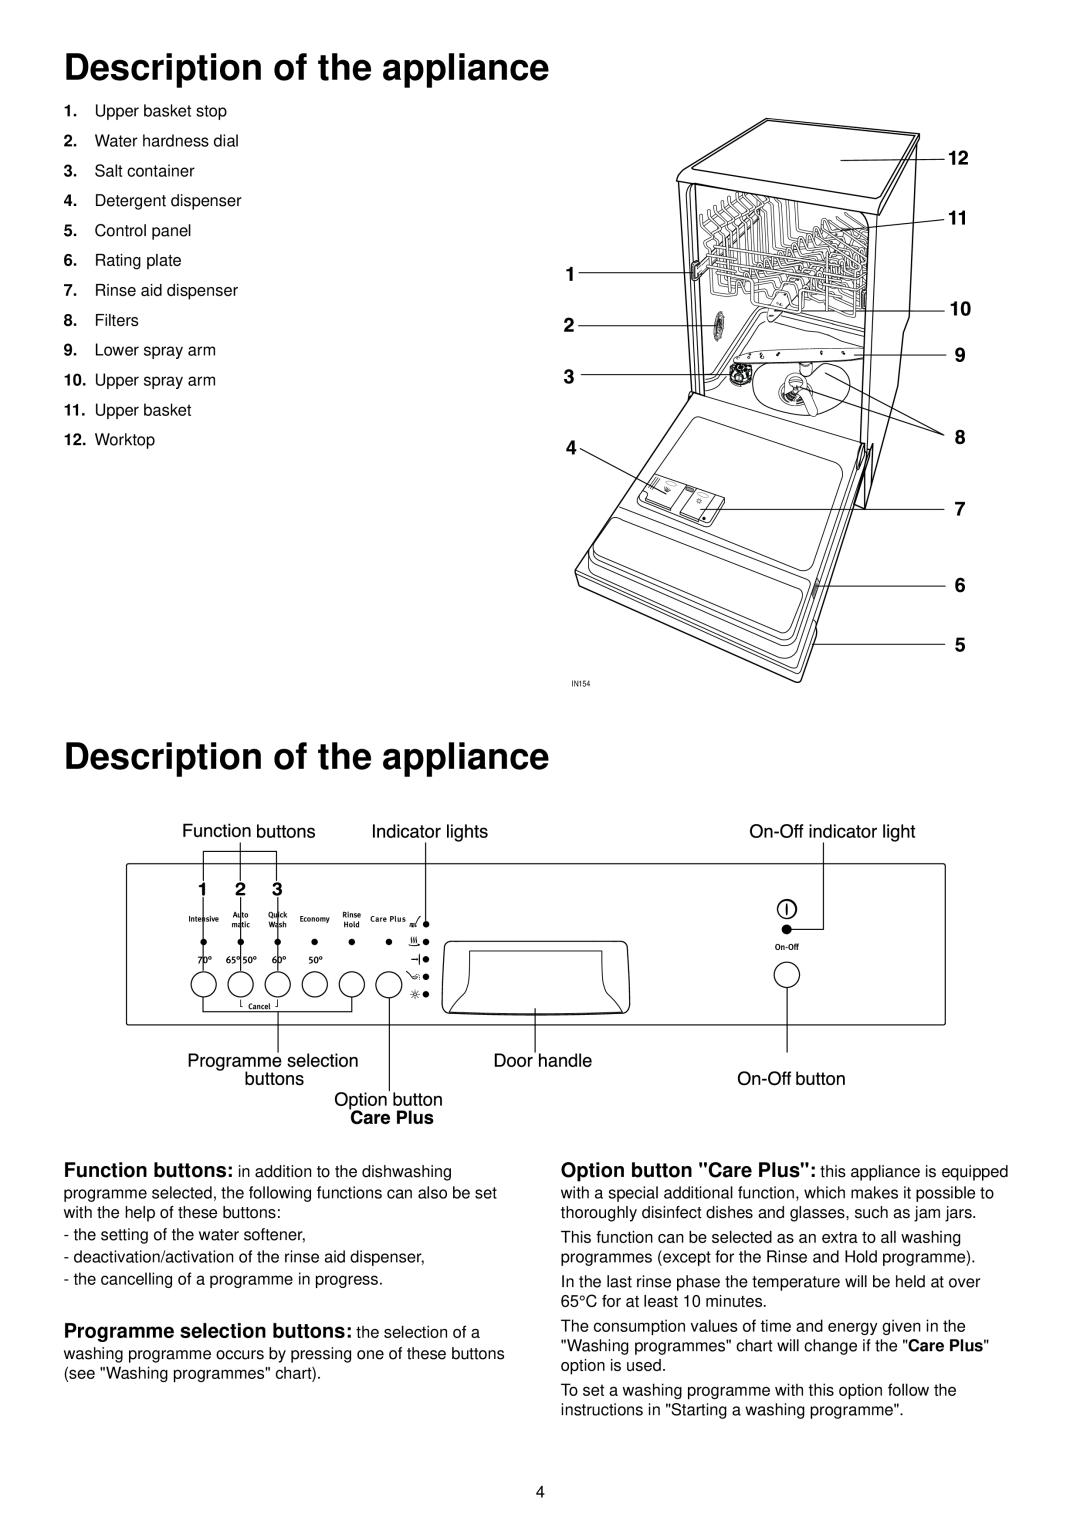 Zanussi ZSF 4123 S manual Description of the appliance, Upper basket stop 2. Water hardness dial 3. Salt container 